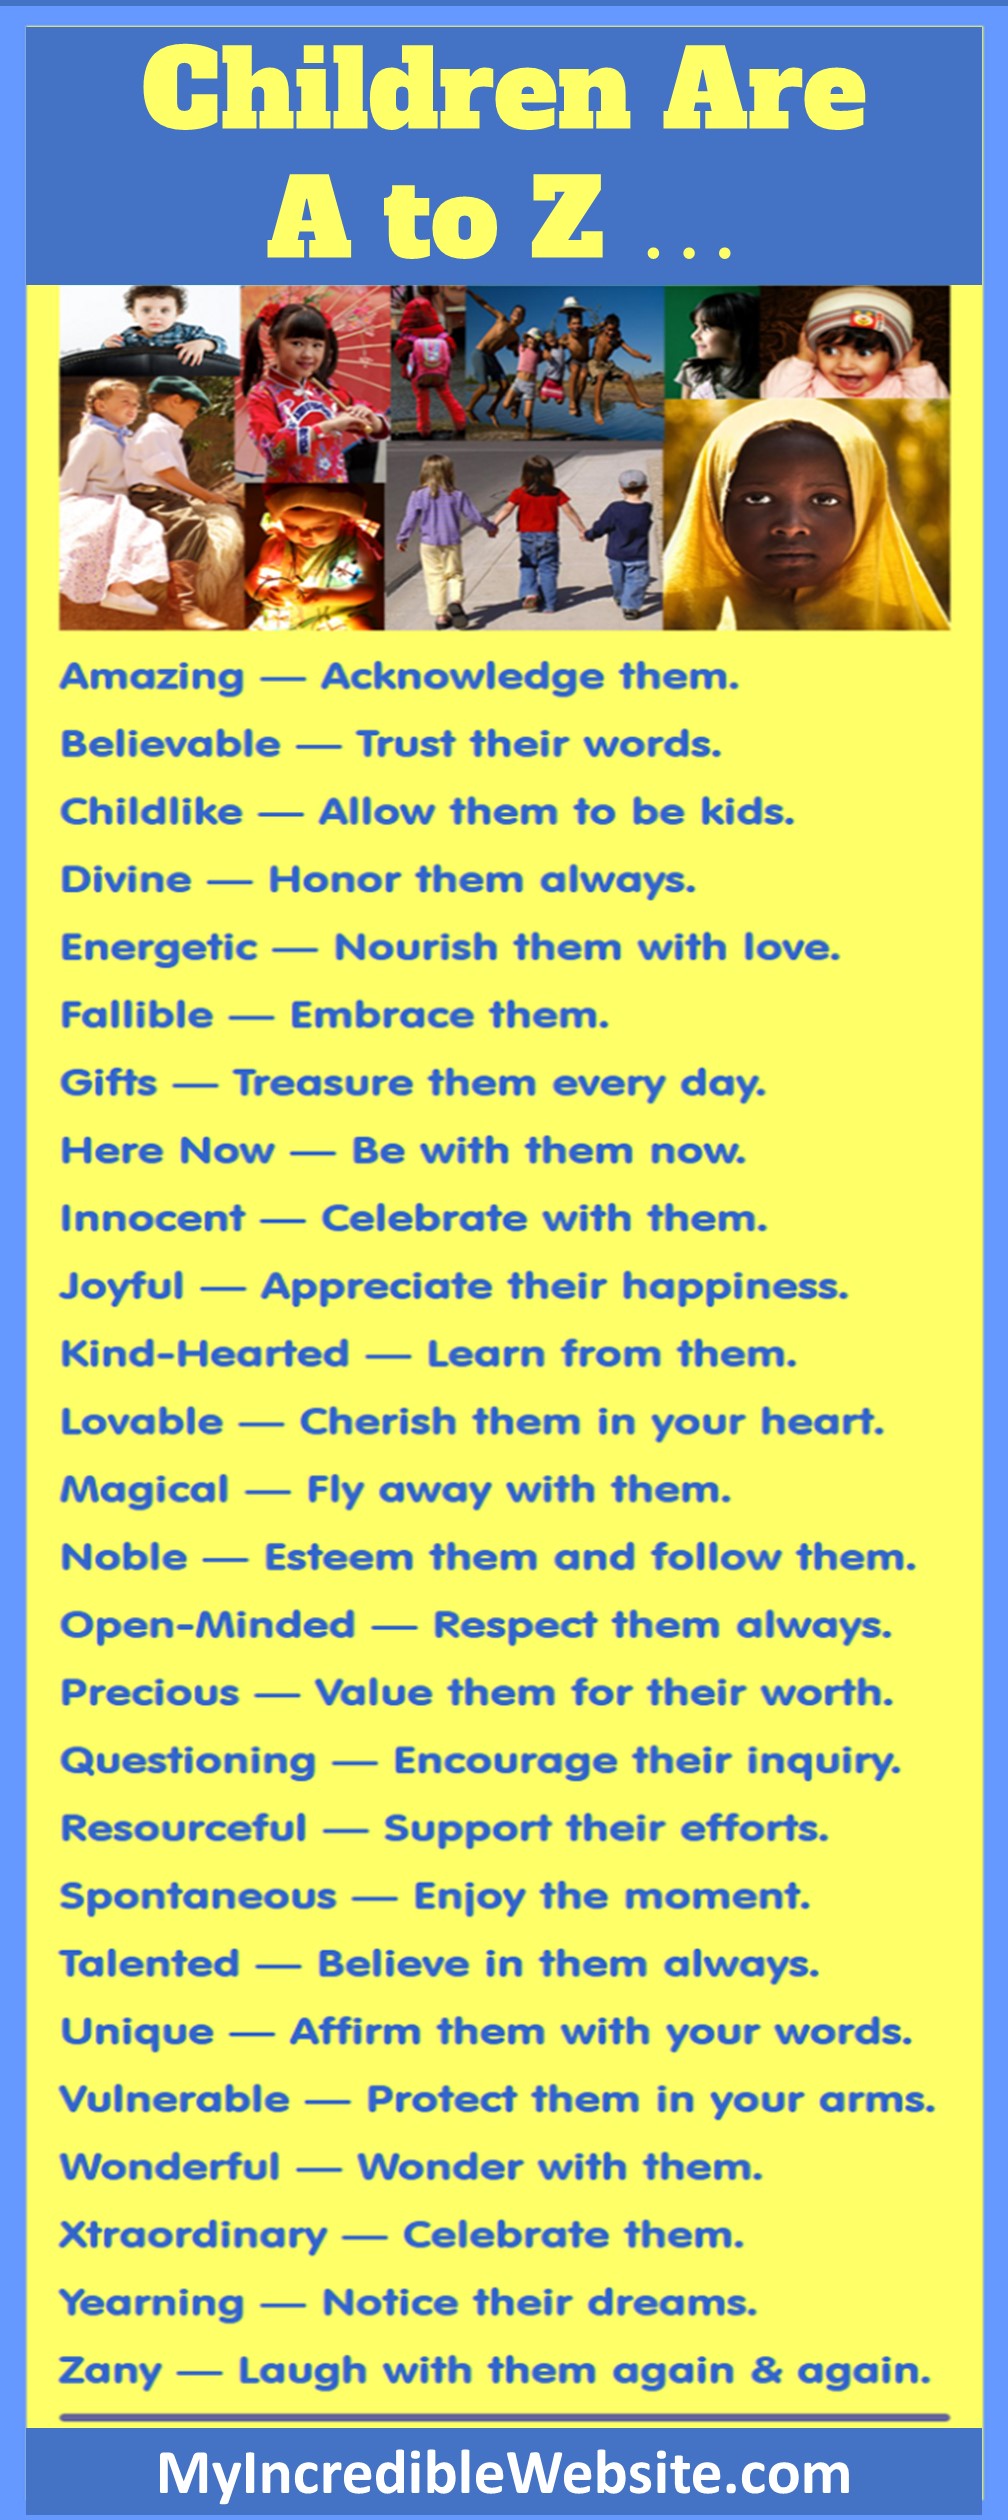 Mothers Day - Children Are A to Z graphic